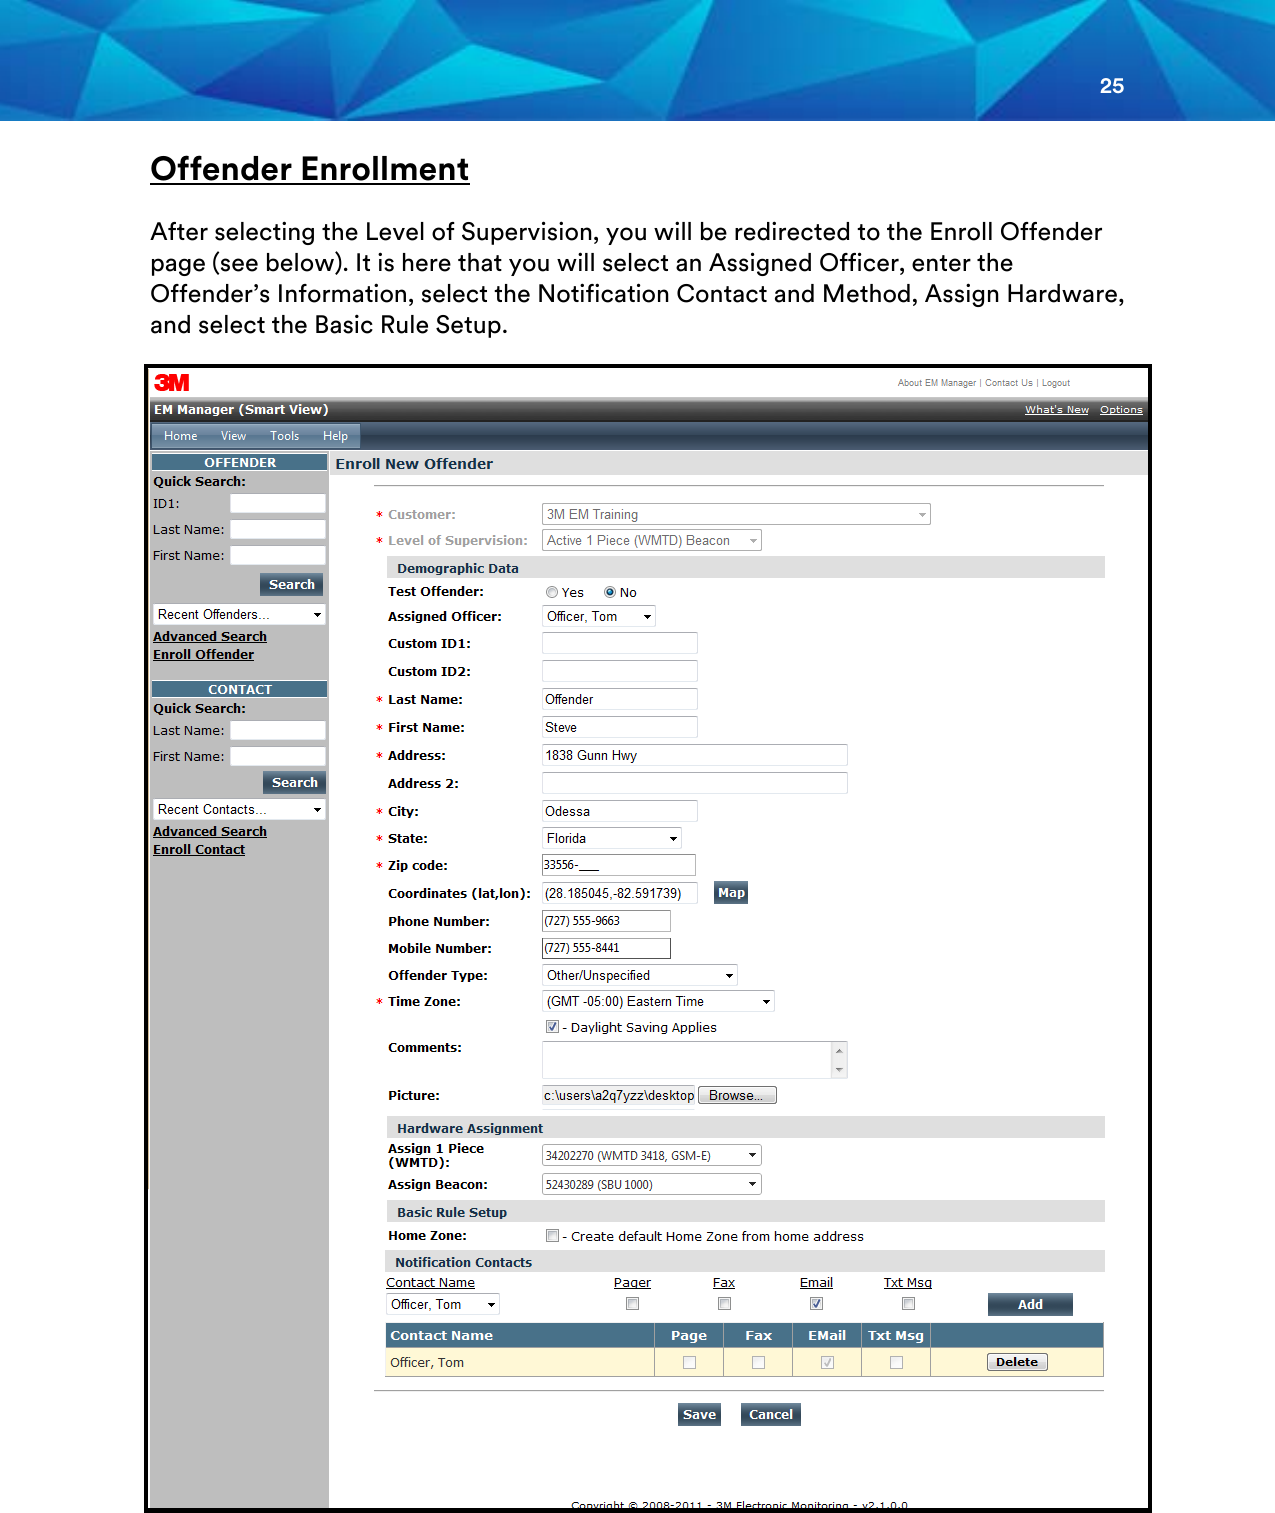 25  Offender Enrollment  After selecting the Level of Supervision, you will be redirected to the Enroll Offender page (see below). It is here that you will select an Assigned Officer, enter the Offender’s Information, select the Notification Contact and Method, Assign Hardware, and select the Basic Rule Setup.    